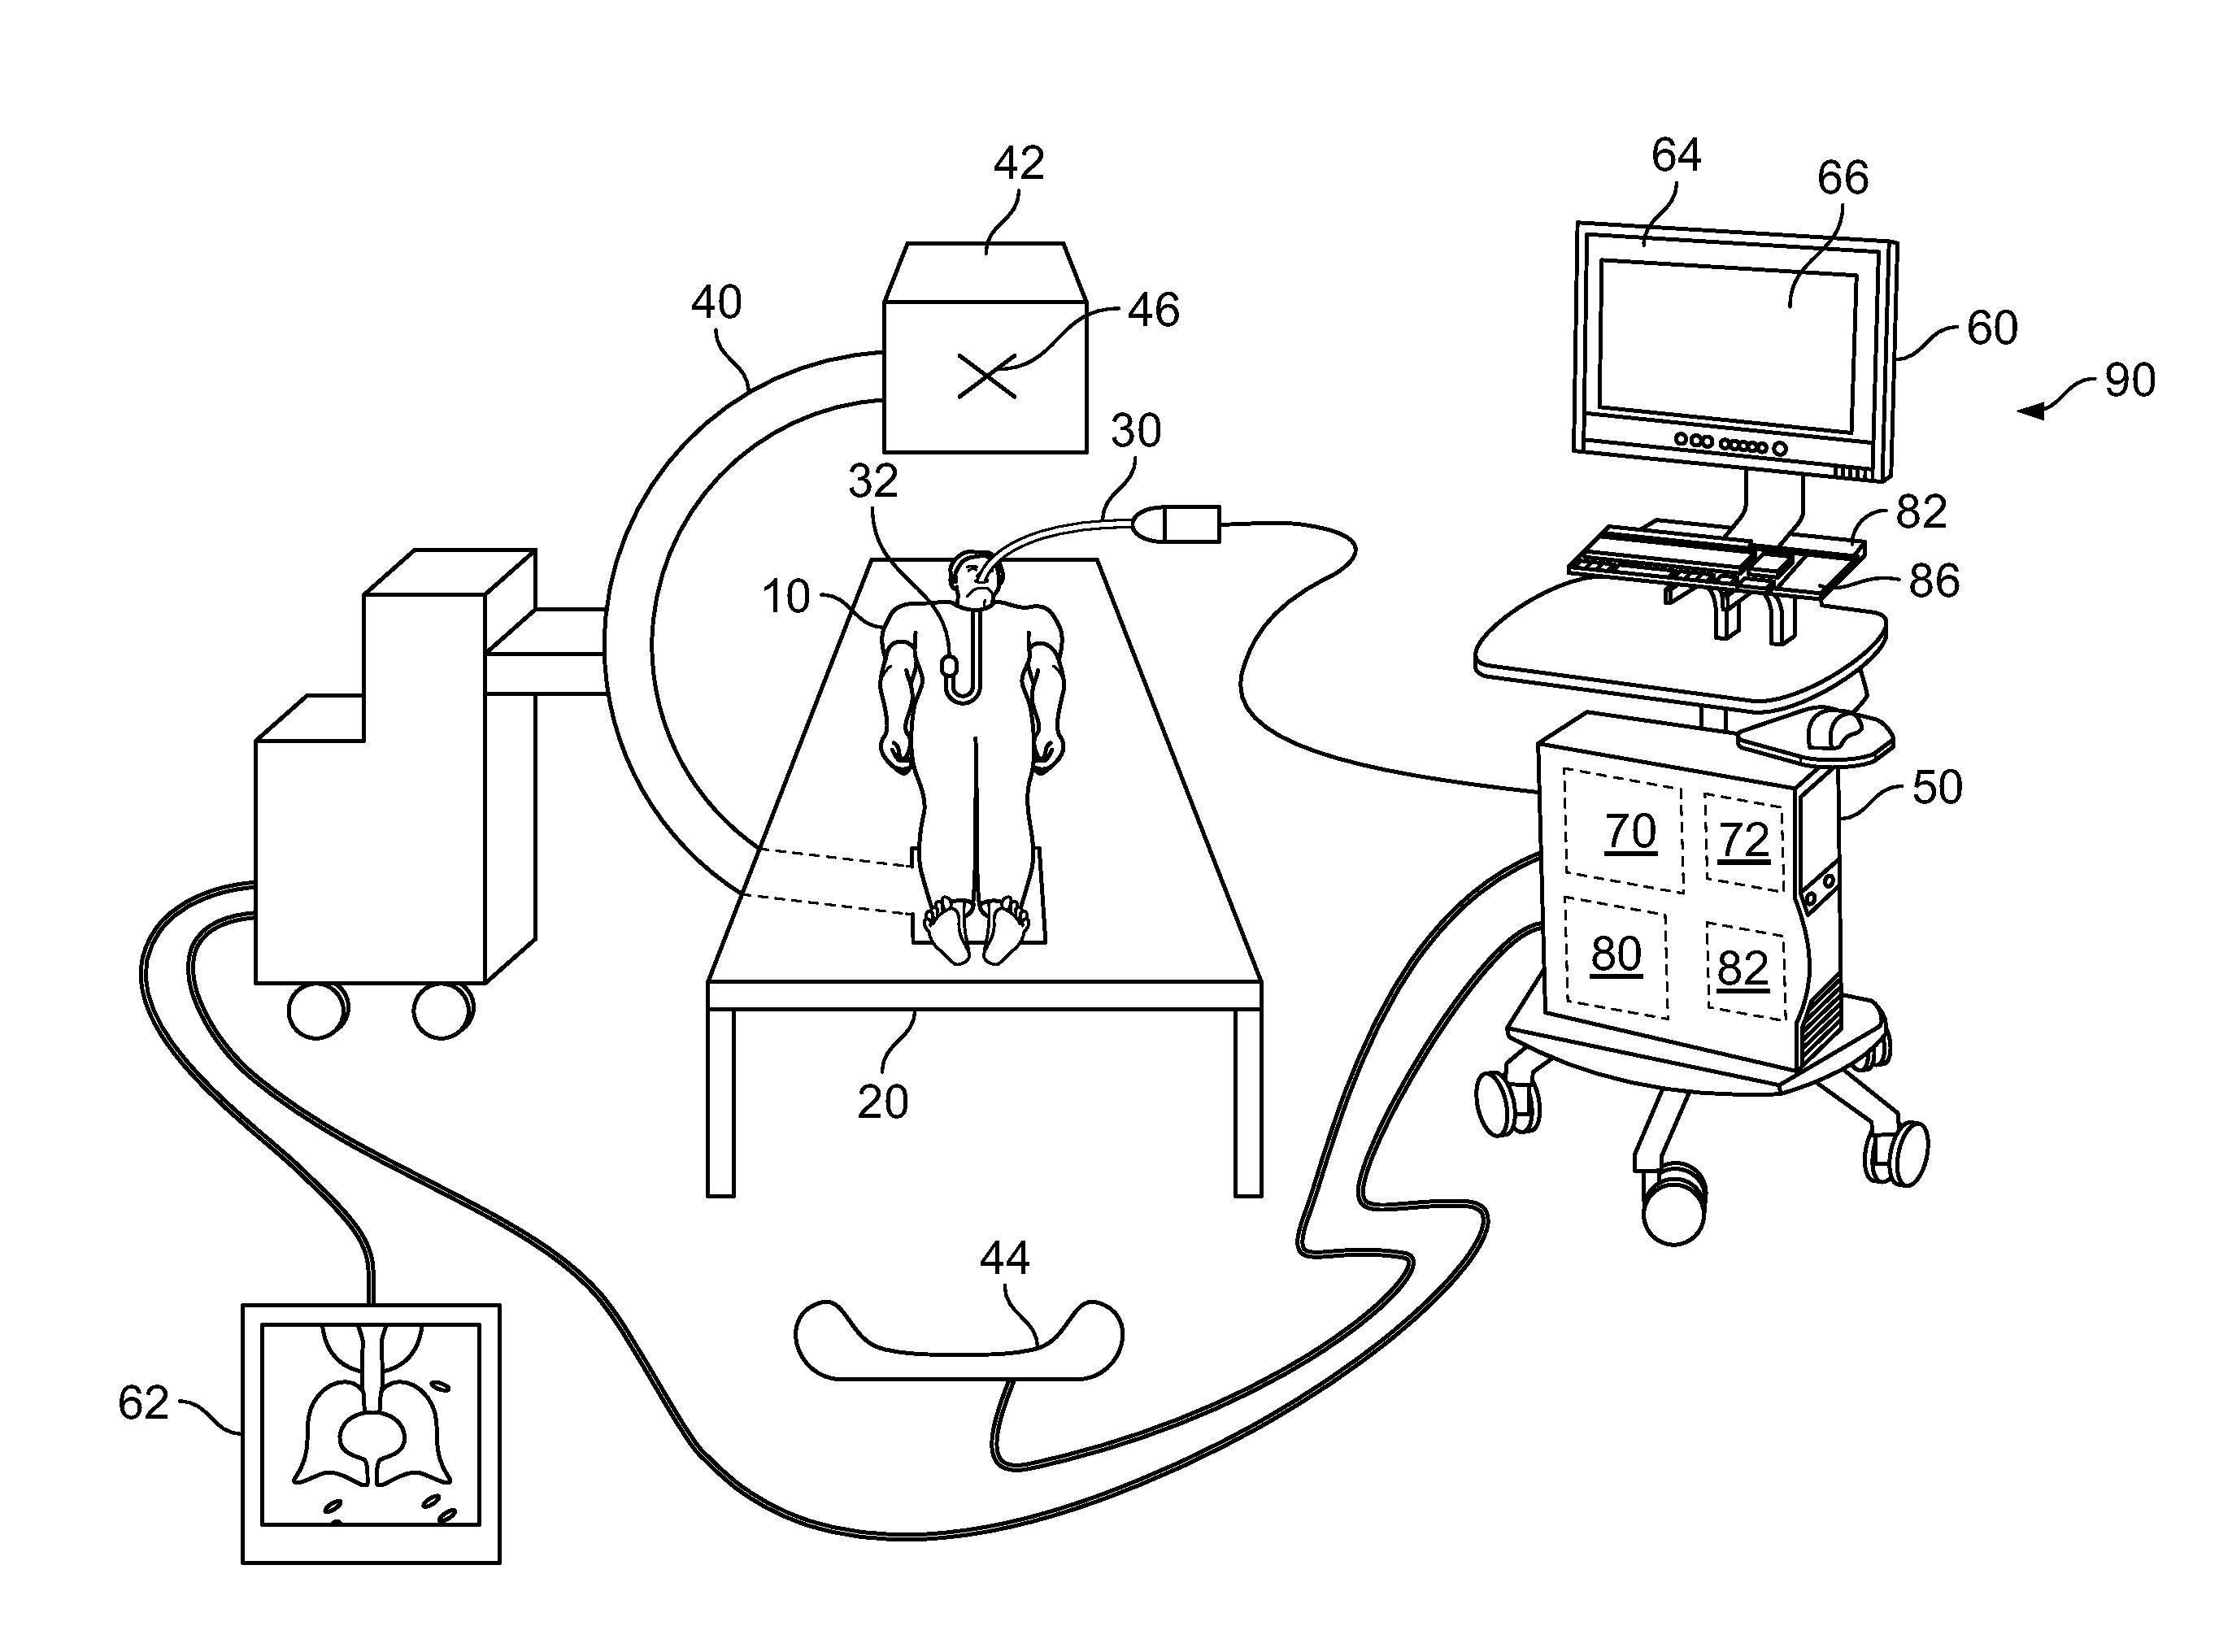 Gpu-based system for performing 2d-3d deformable registration of a body organ using multiple 2d fluoroscopic views